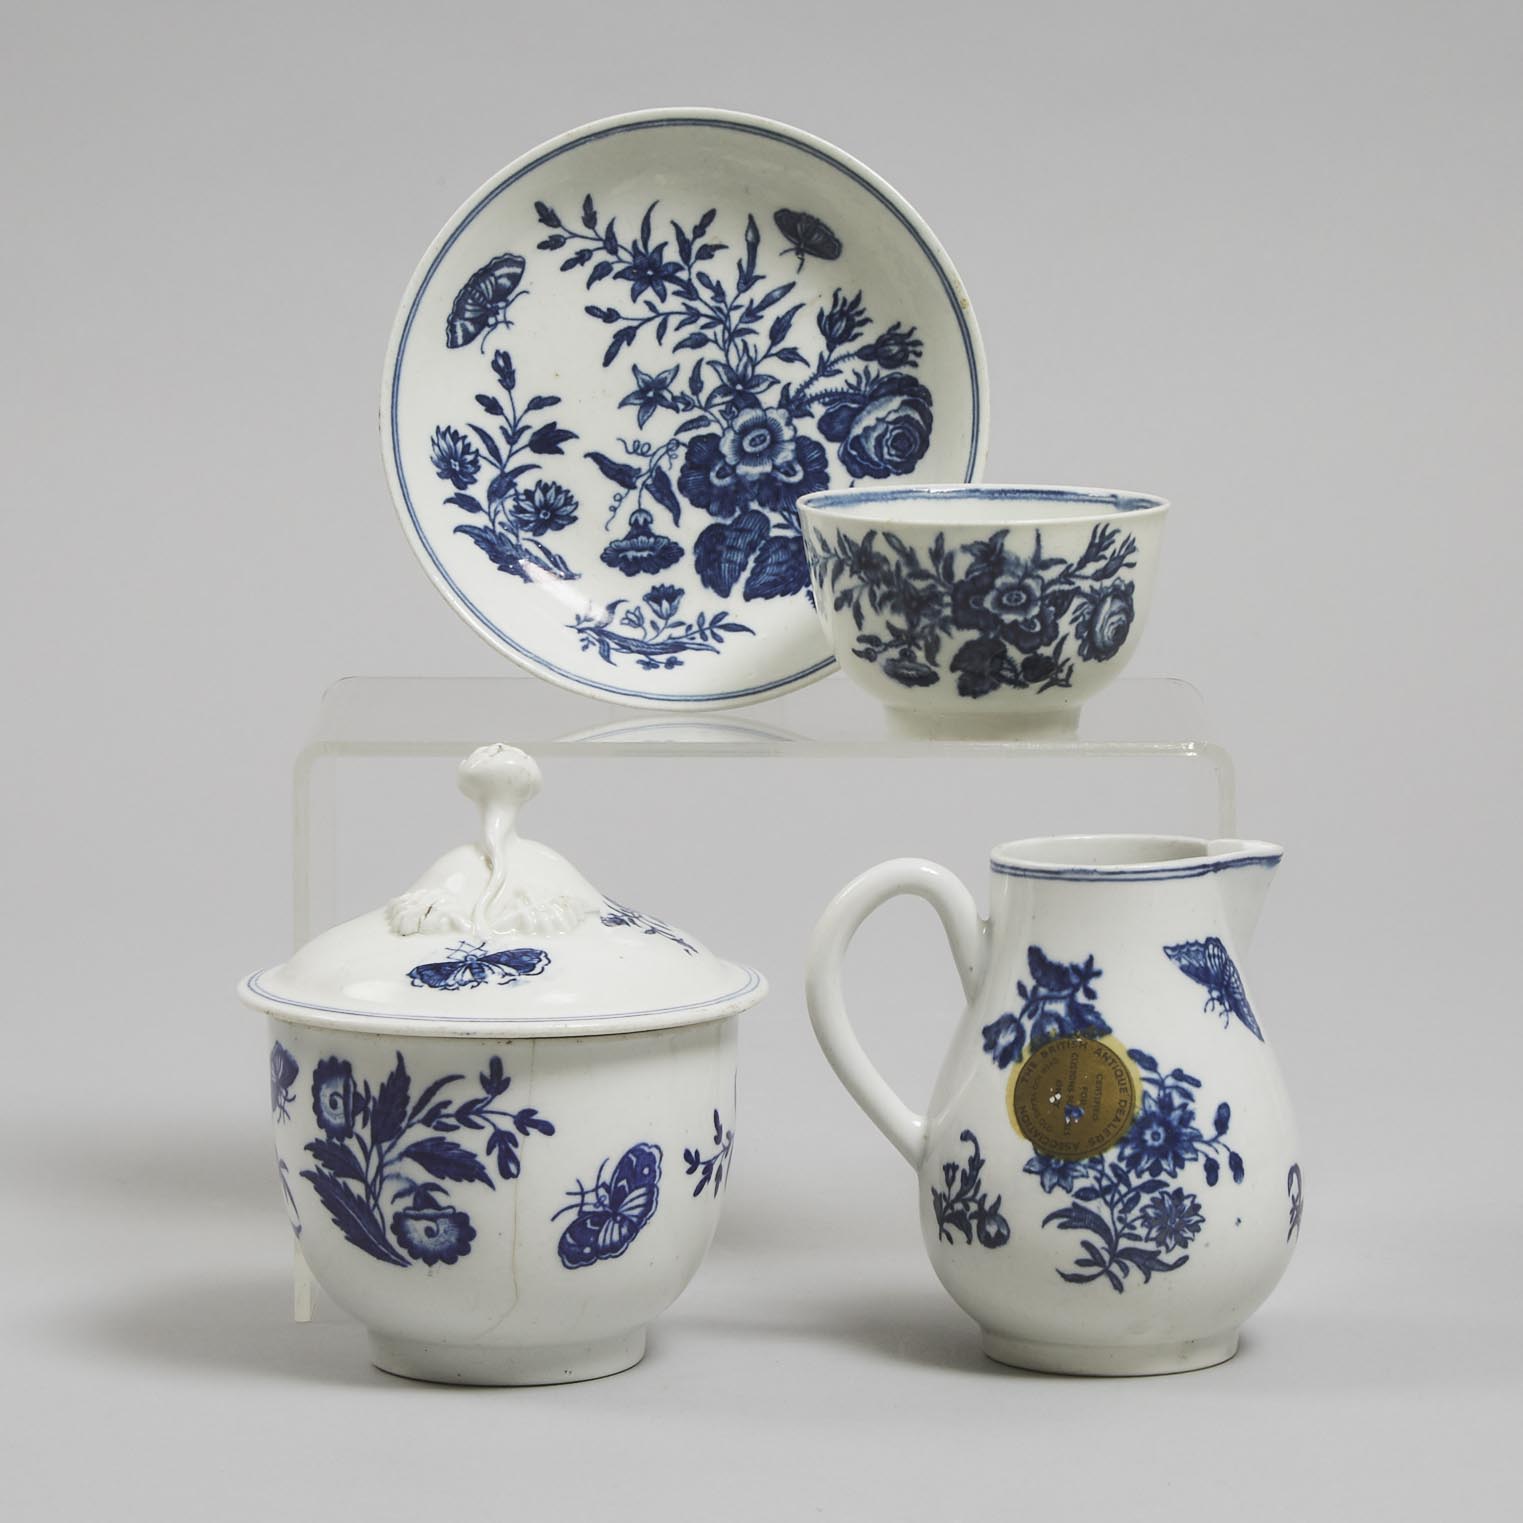 Worcester 'Three Flowers' Pattern Covered Sugar Bowl, Cream Jug, Tea Bowl and Saucer, c.1775